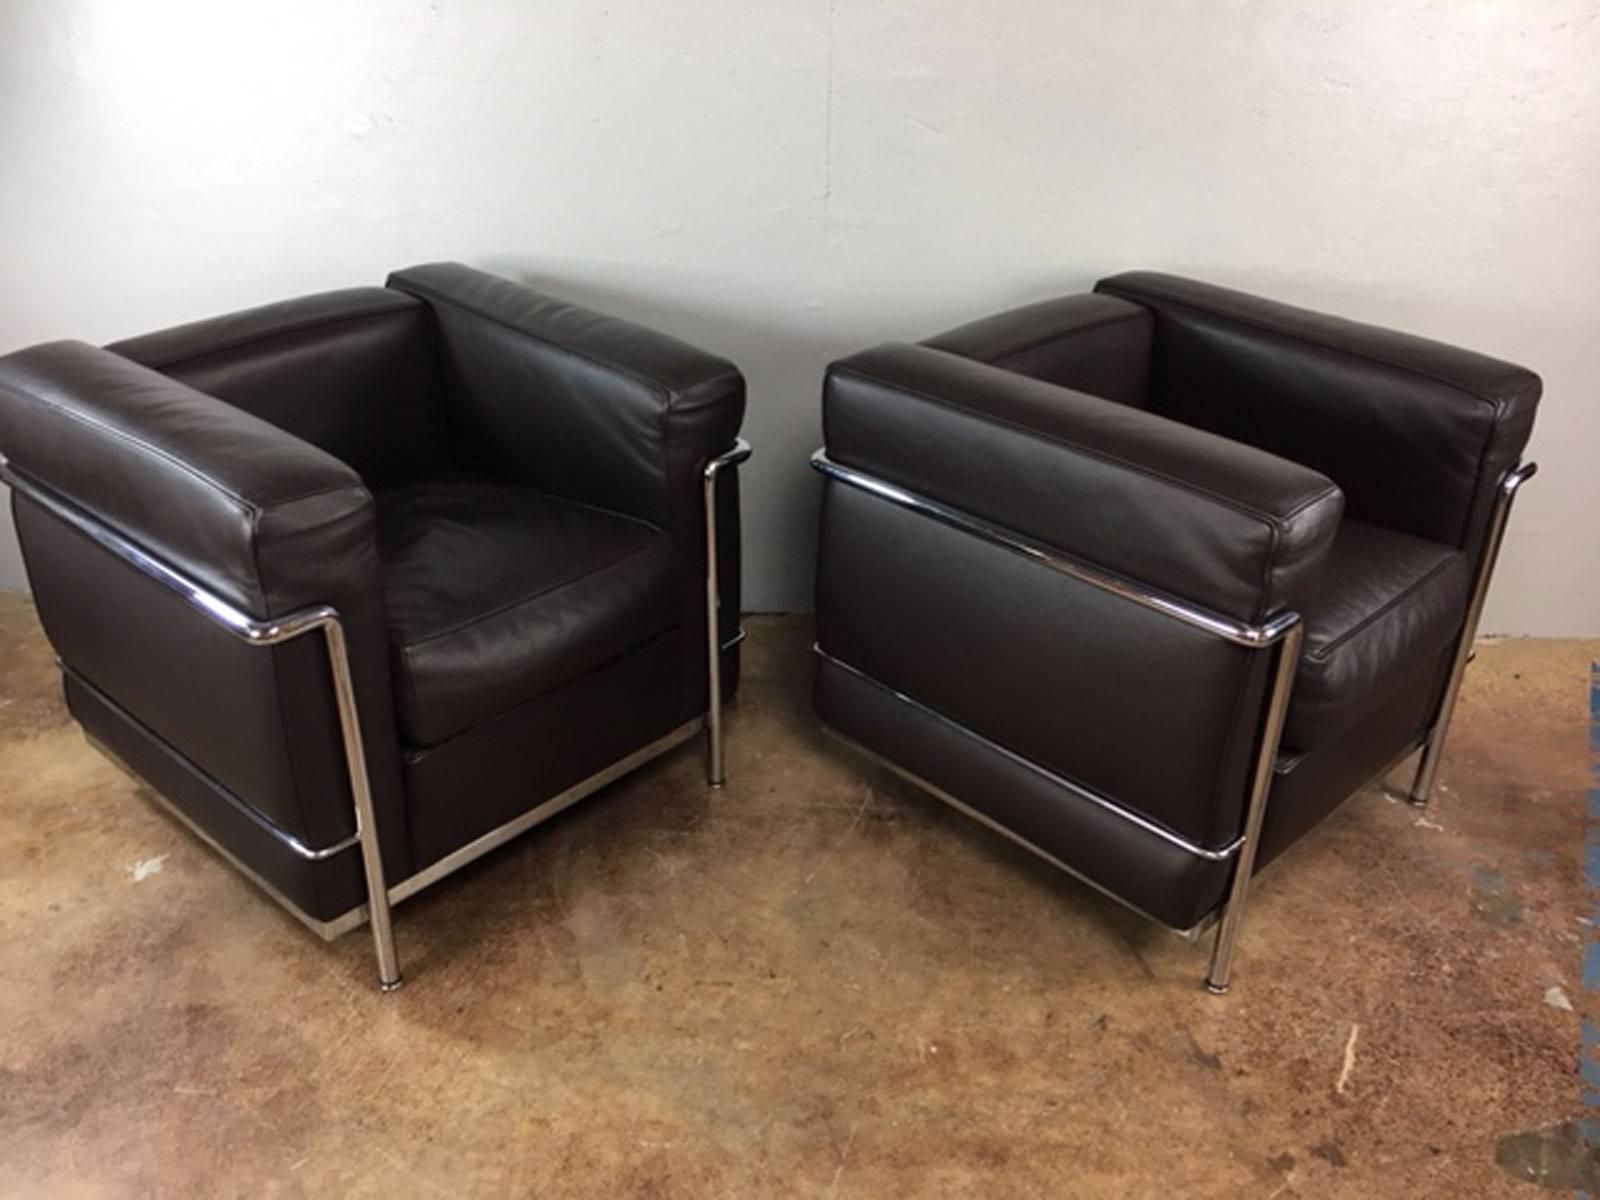 Superb pair of Le Corbusier LC2 club chairs in chocolate brown leather by Cassina for Knoll. Down filled seat cushions. Chairs are tagged on the bottom. 

Measures: Seat height is 18